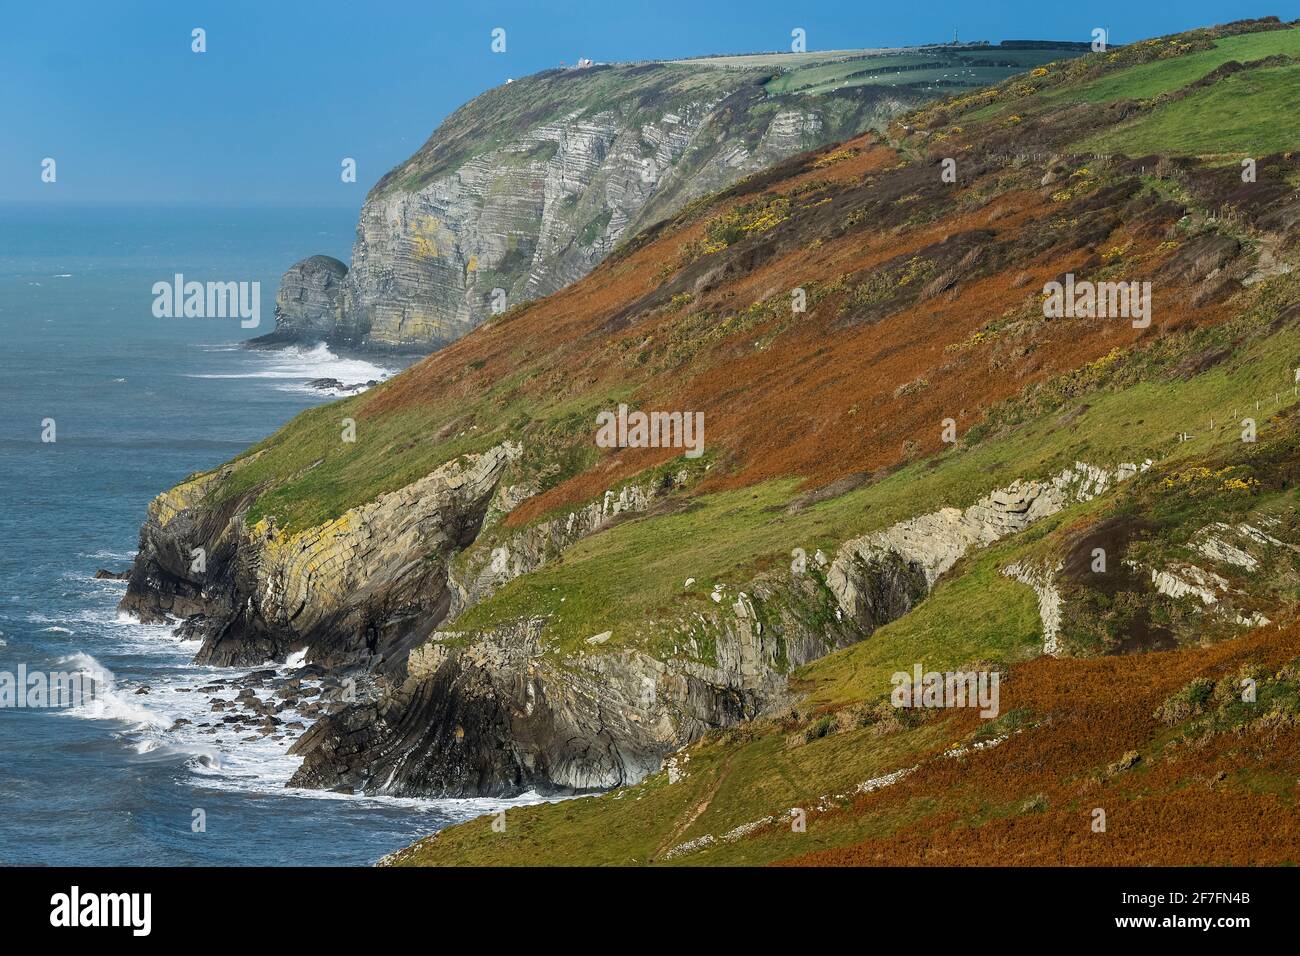 The folded Llandovery Series of Silurian rocks at Castell Bach and Bird Rock far beyond, Cwmtydu, New Quay, Ceredigion, Wales, United Kingdom, Europe Stock Photo